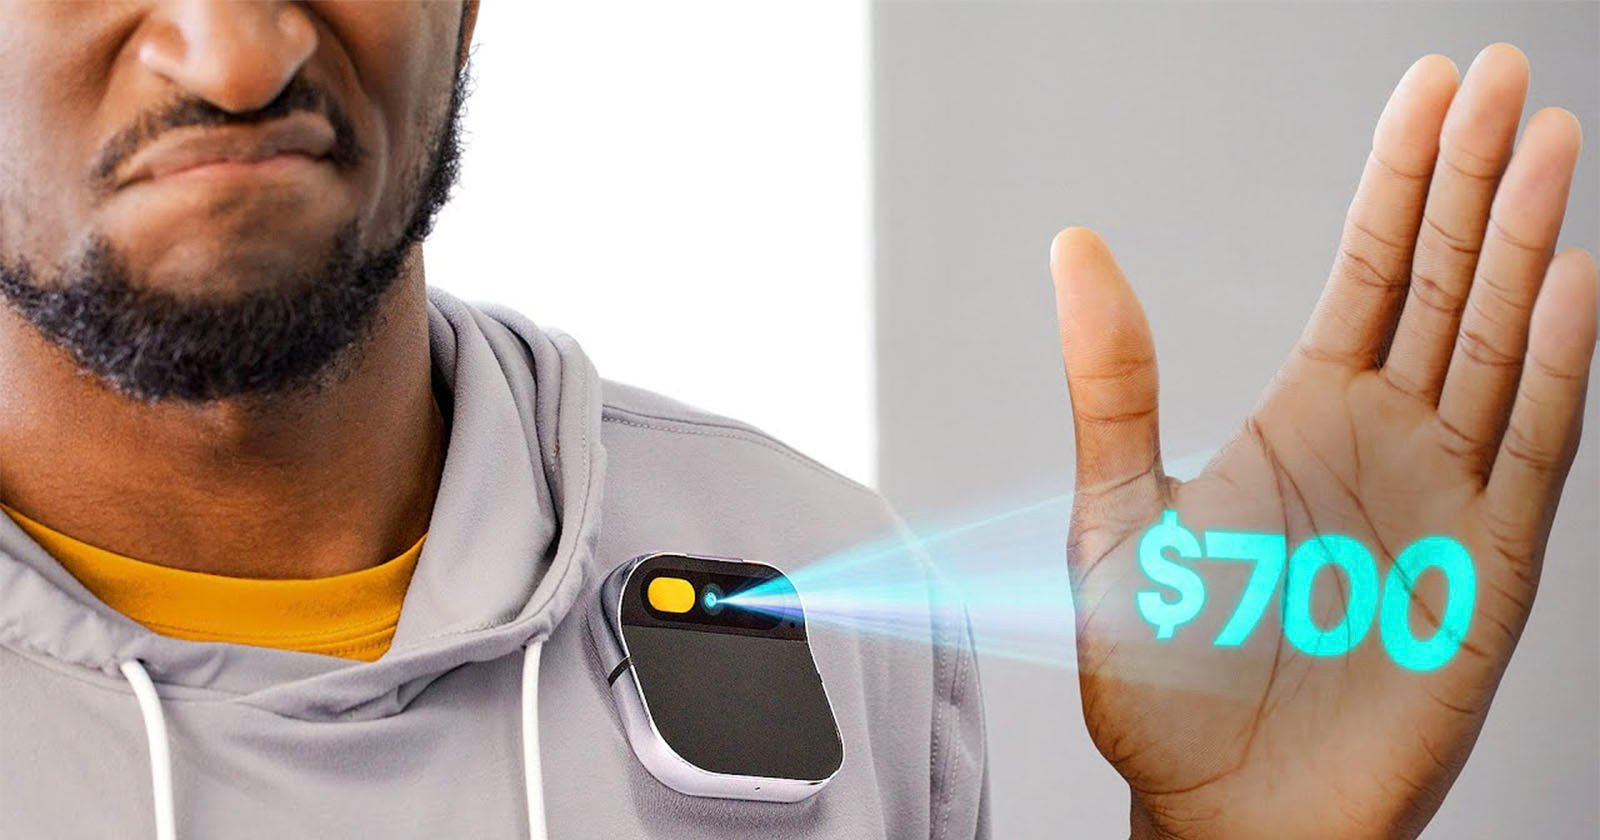 YouTuber Marques Brownlee, AKA MKBHD, has released a scathing review of the highly-funded, much-hyped, camera-equipped wearable device called the Huma